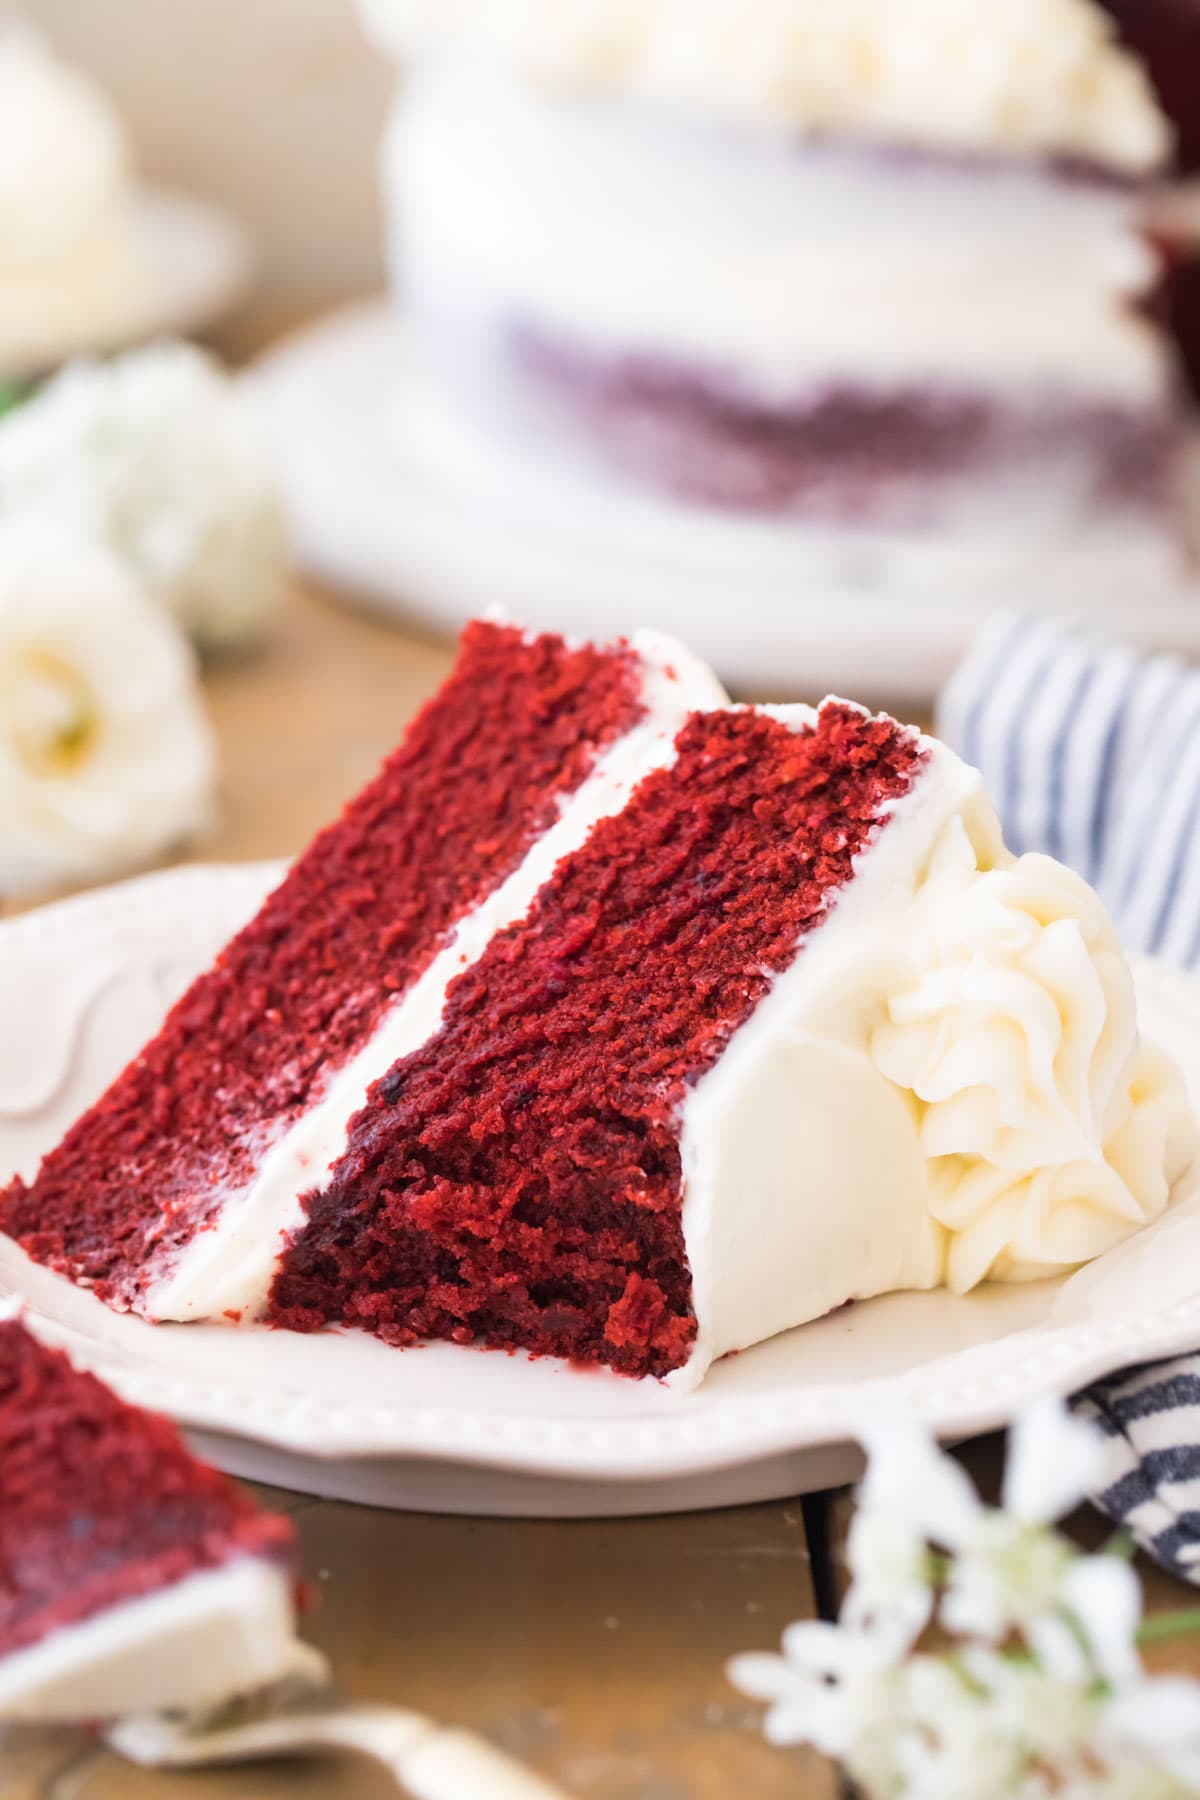 slice of red cake with bite missing